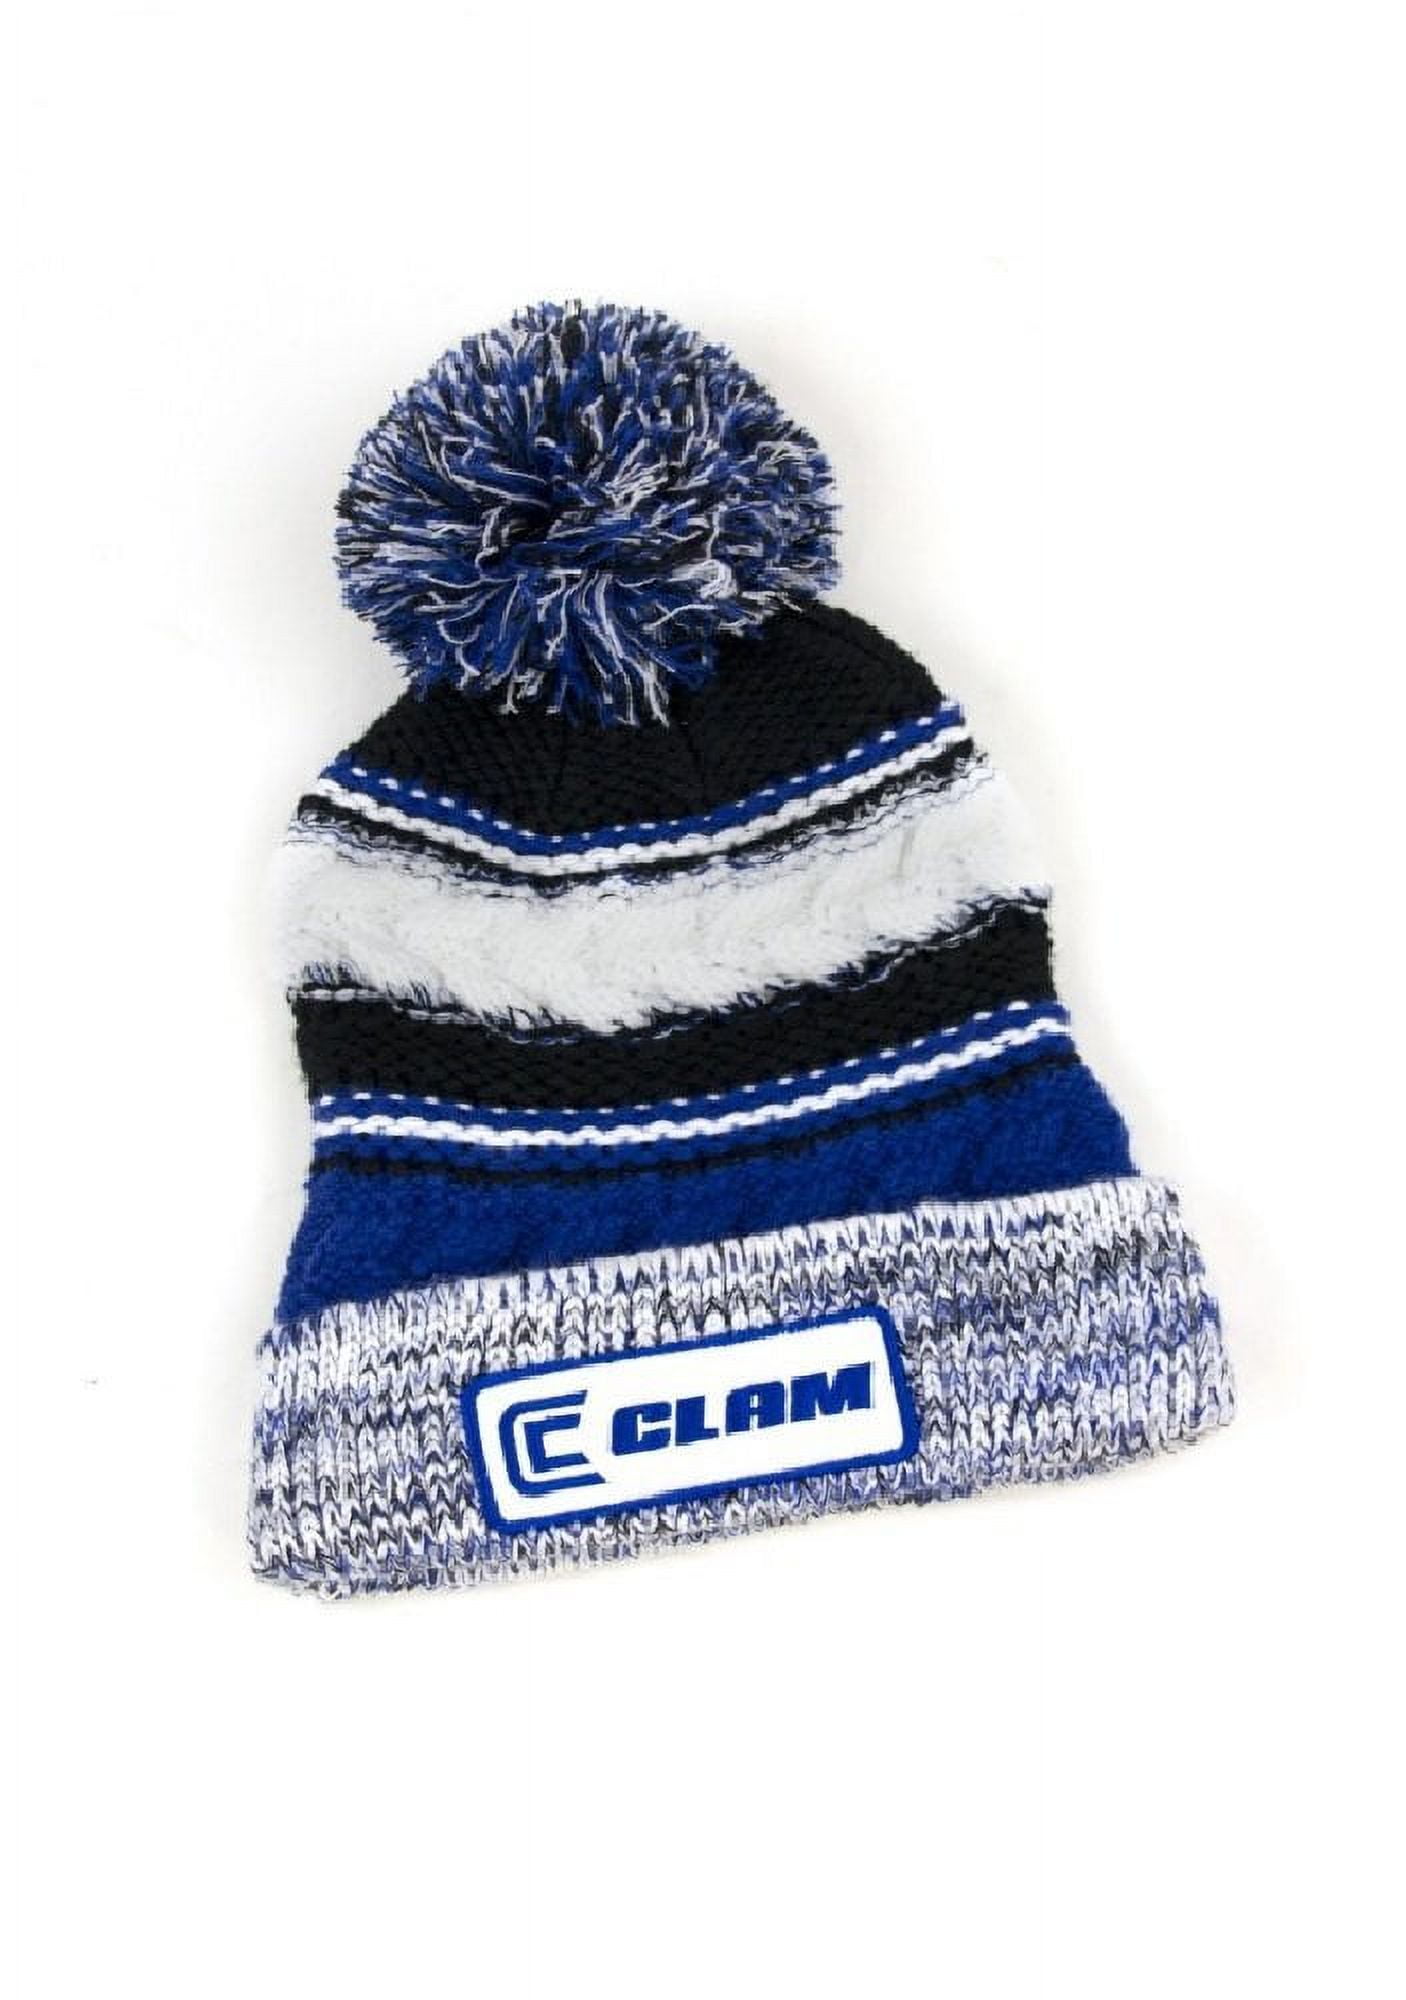 Clam Outdoors Ice Armor Pom Stocking Hat Winter Outdoor Gear, Blue, Unisex,  Adults